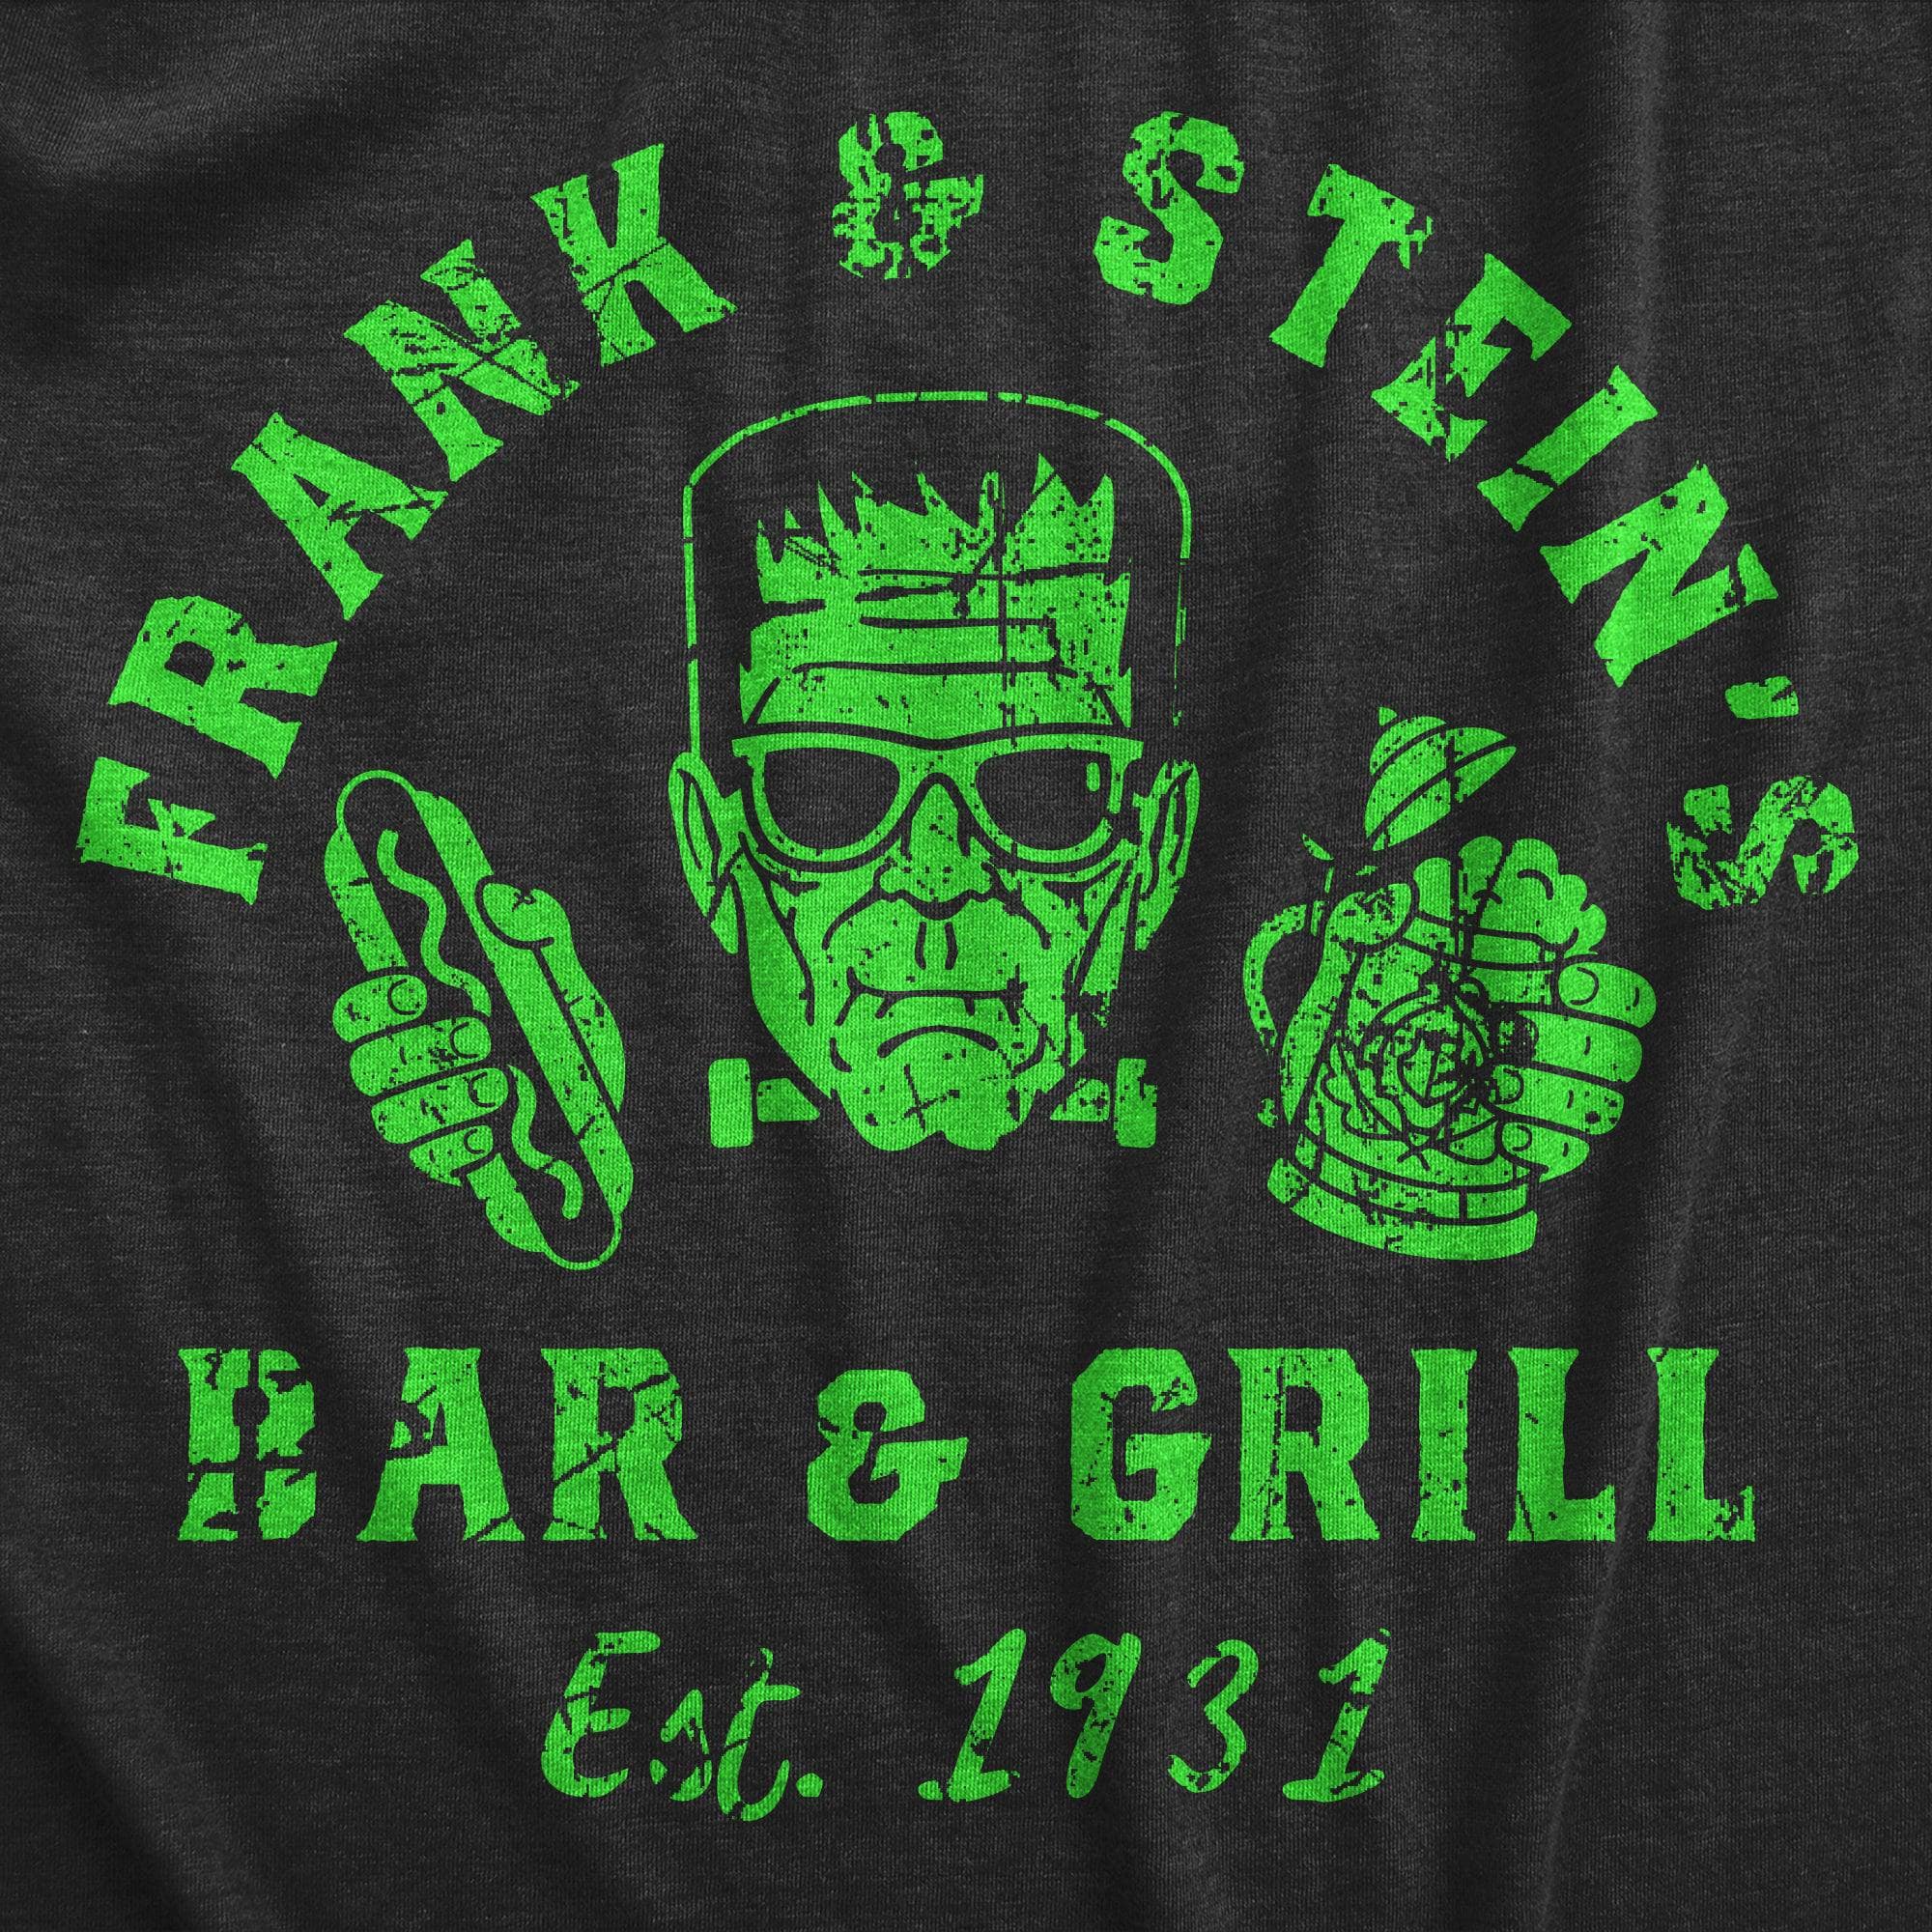 Frank And Steins Bar And Grill Women's Tshirt  -  Crazy Dog T-Shirts